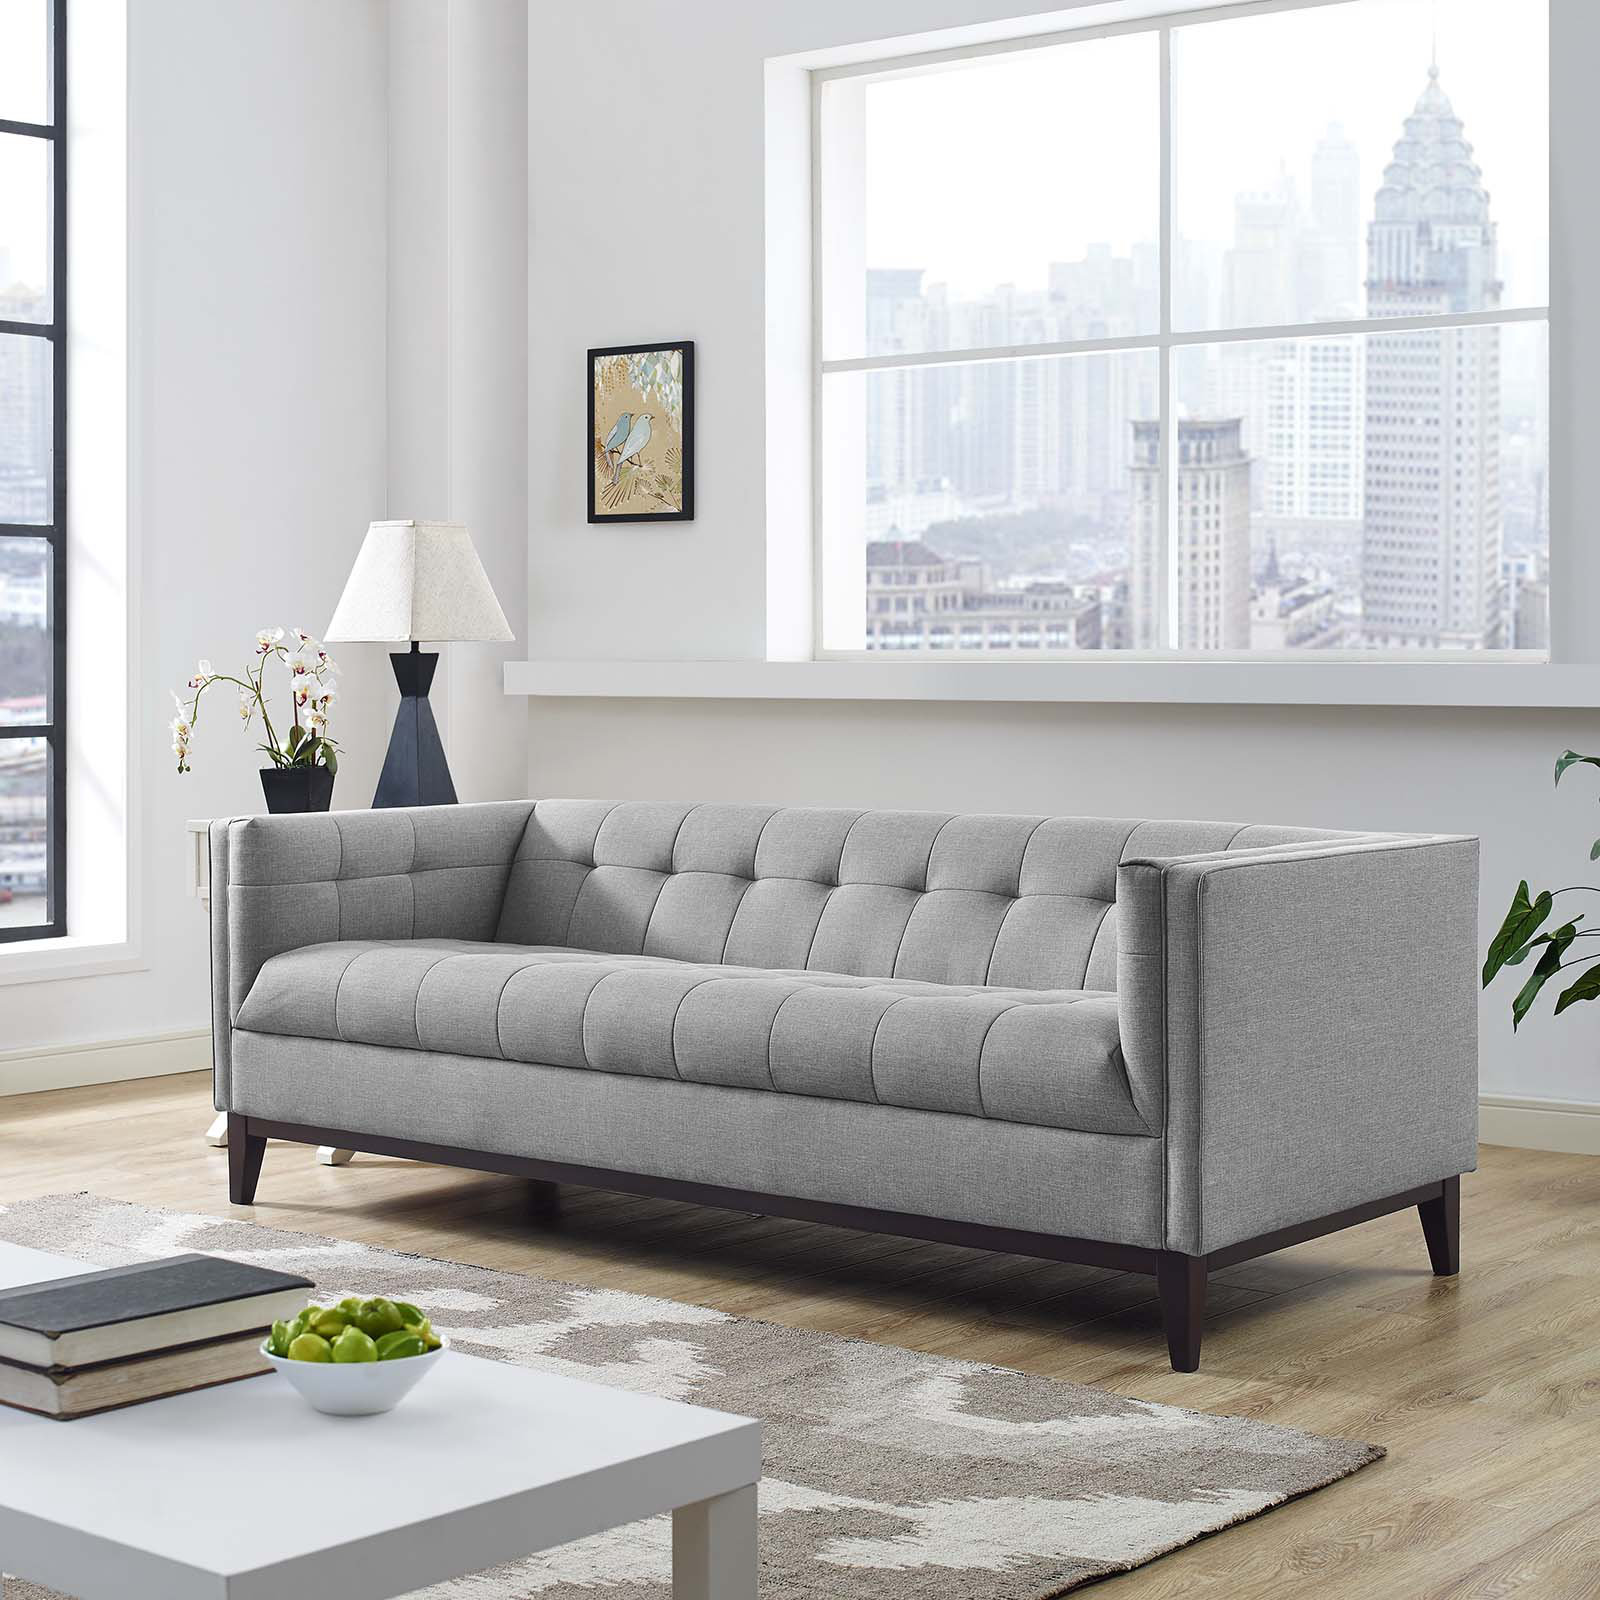 85.4 Modern Nappa Leather Upholstered Sofa 3-Seater Sofa Pillow